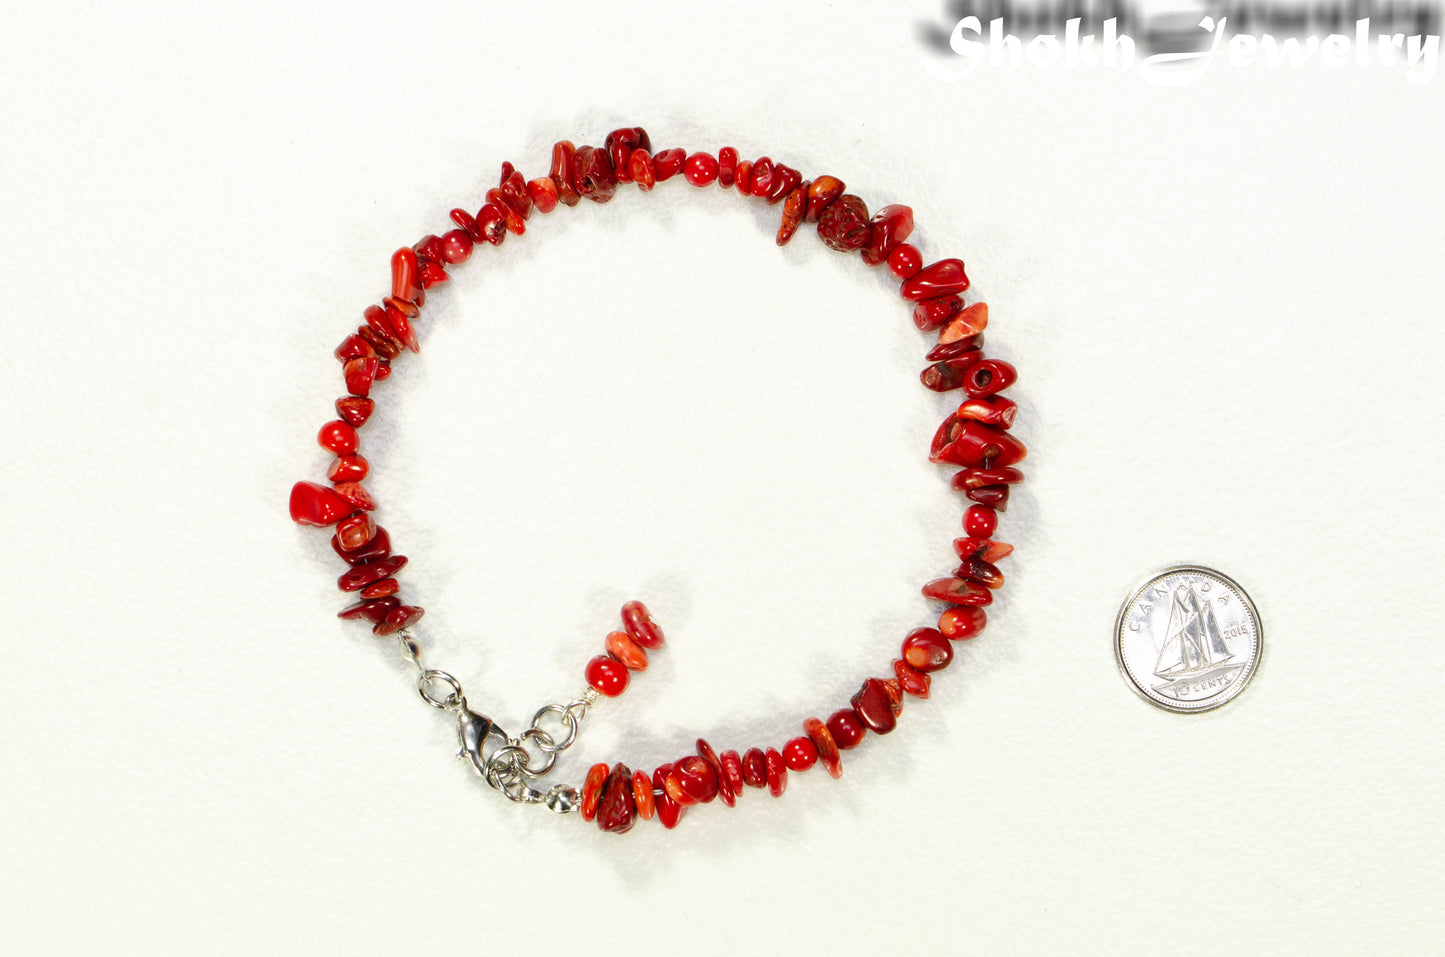 Top view of Natural Red Coral Chip bracelet.